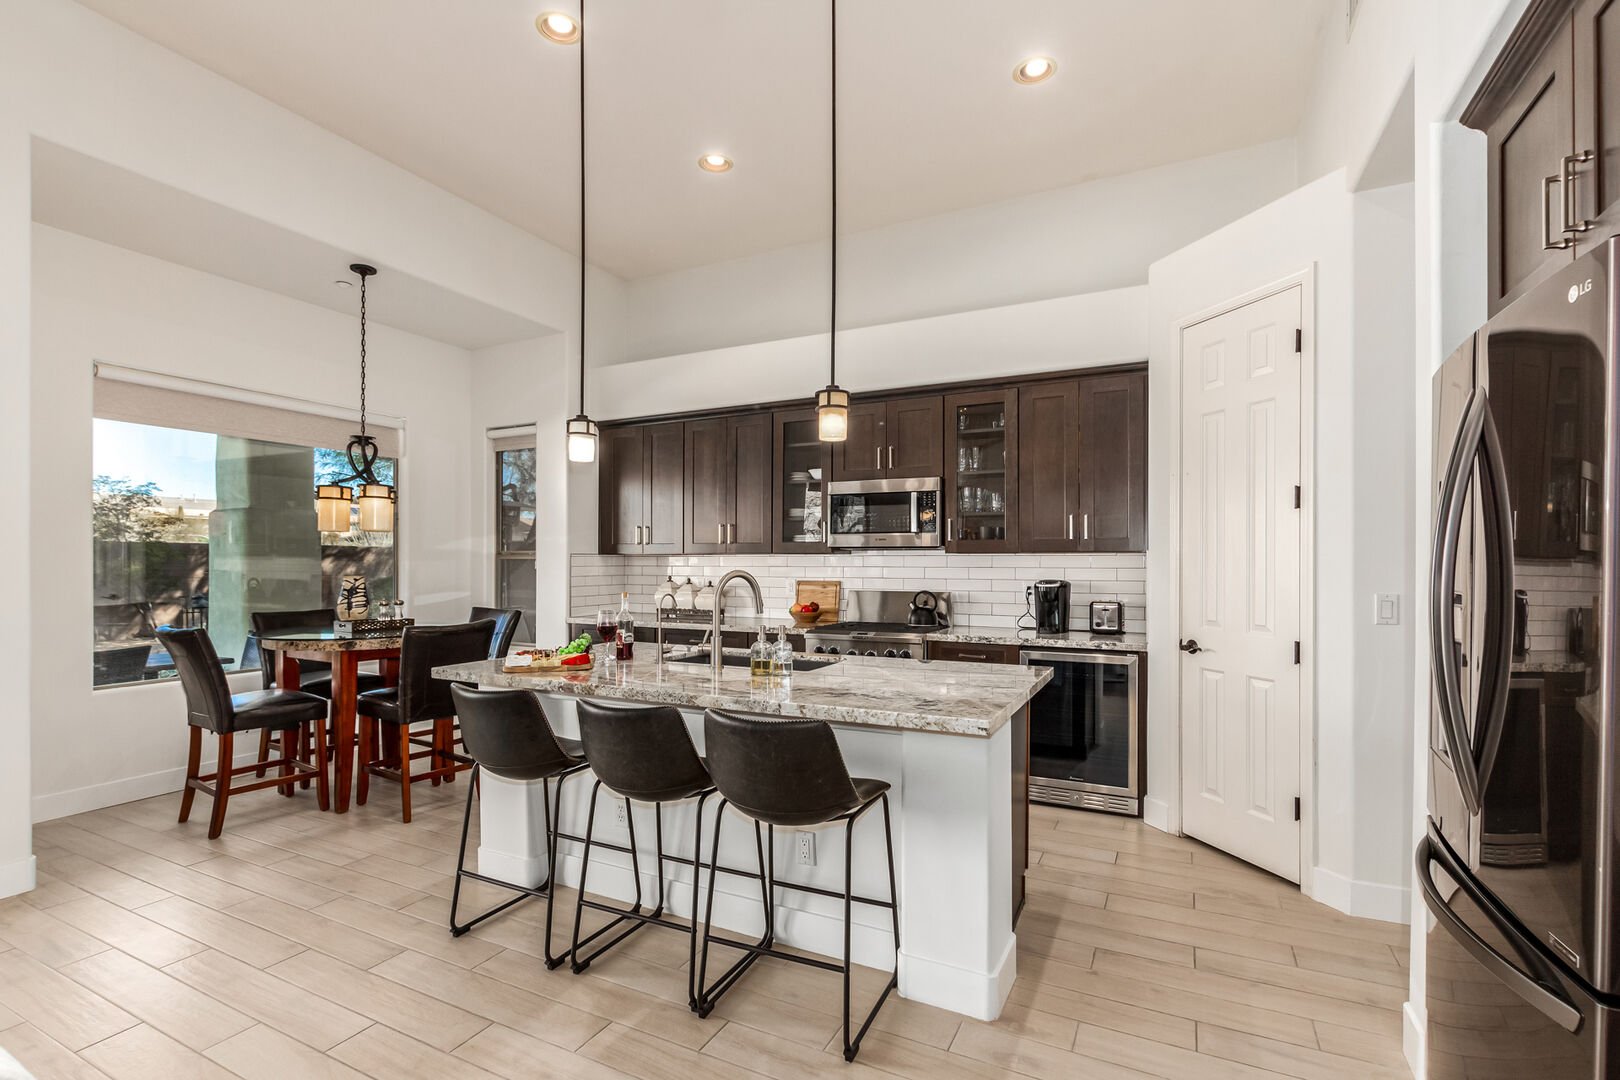 Fully Equipped Kitchen stocked with basic cooking essentials and stainless steel appliances overlooking informal dining area.